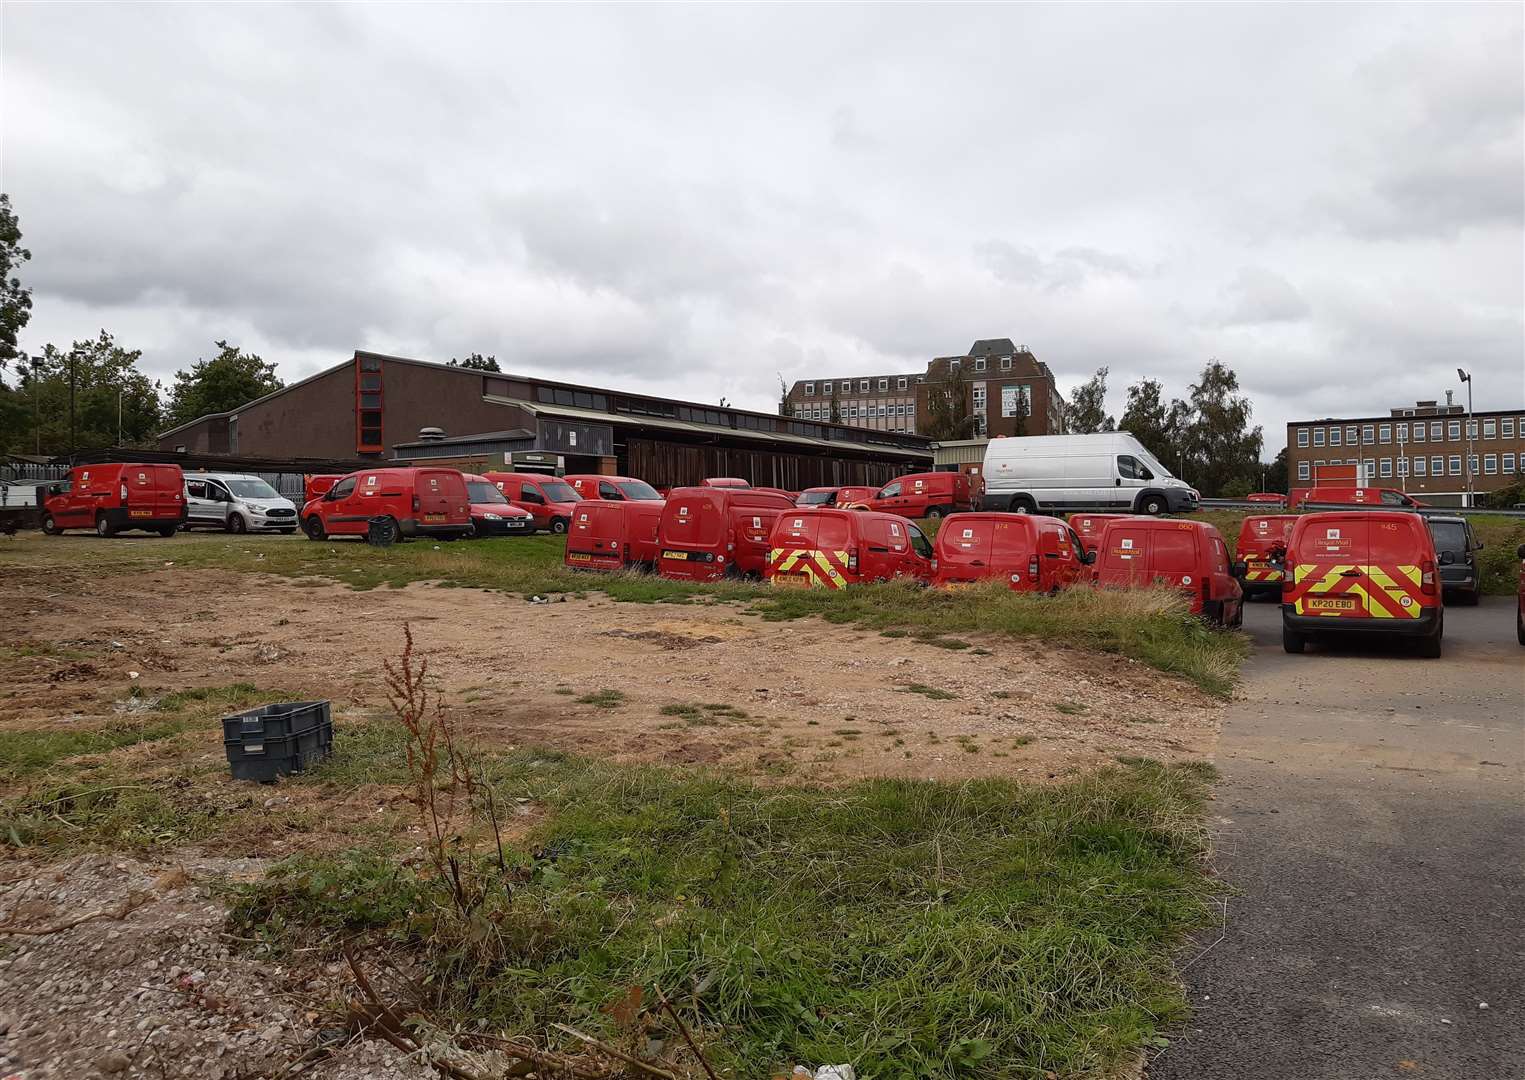 Royal Mail staff can no longer leave their own vehicles on the Sorting Office site